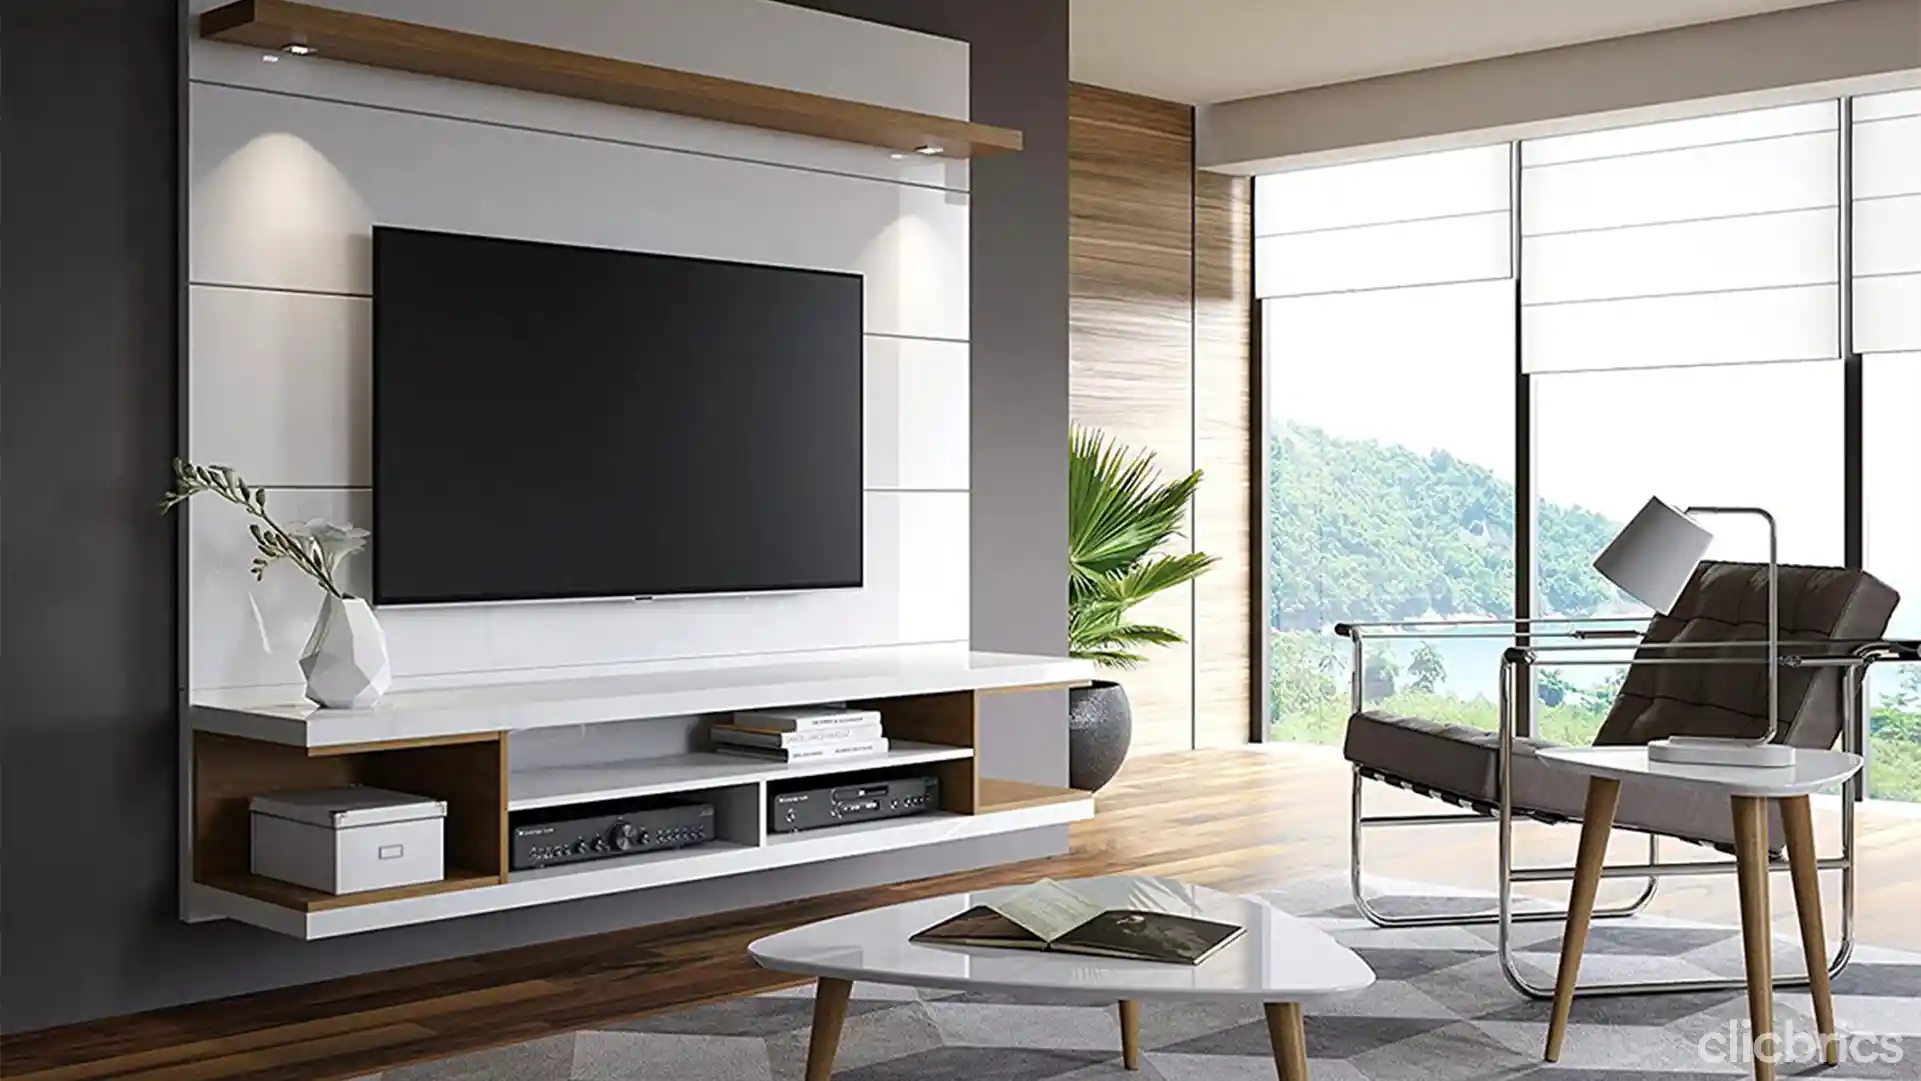 Tv wall unit with dressing table | Tv wall unit, Modern tv wall units, Lcd  wall design